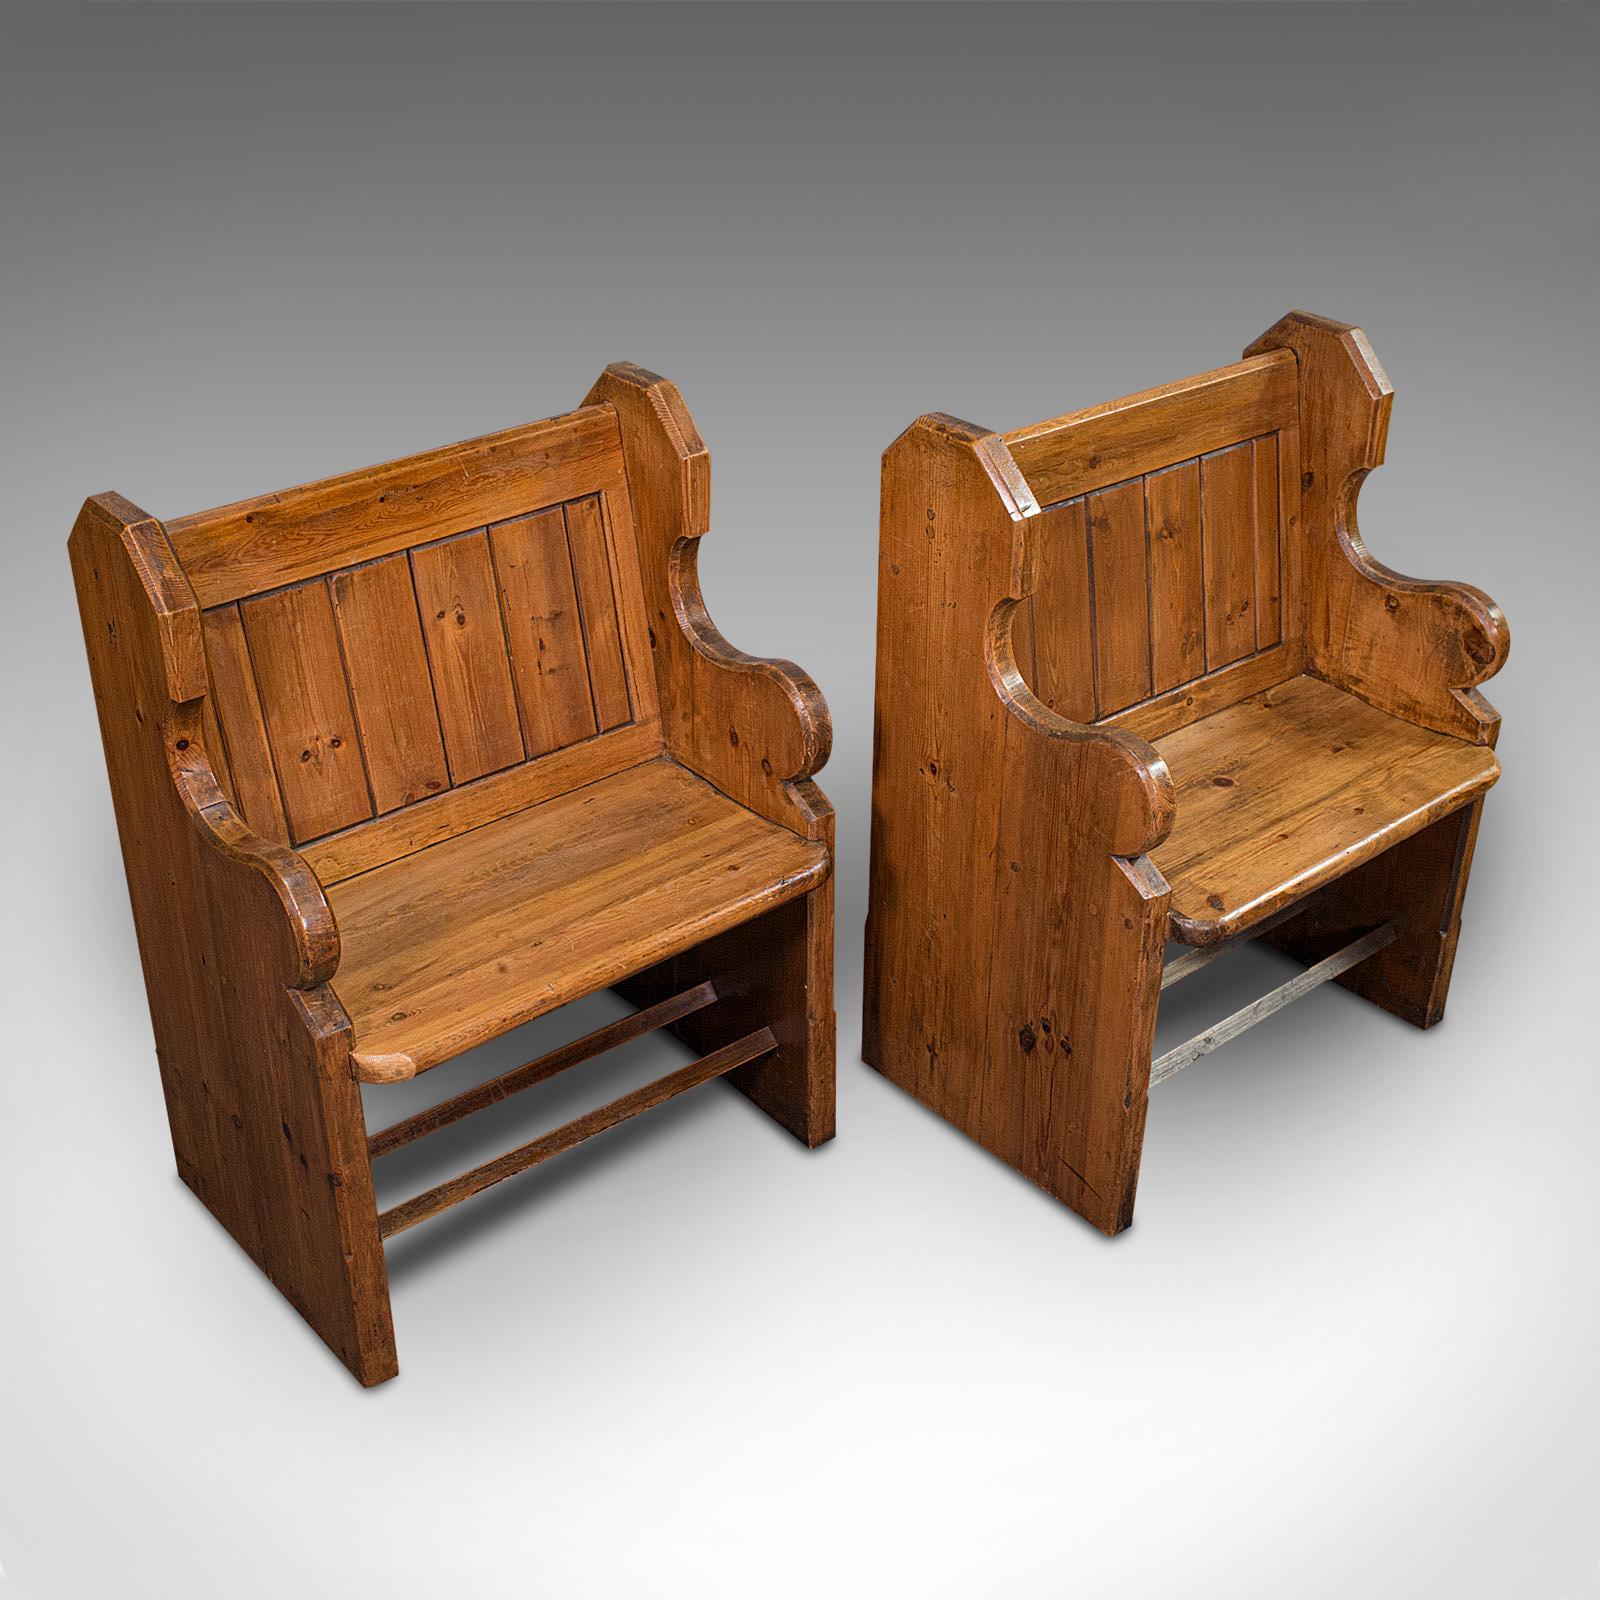 Pair of Antique Hall Seats, English, Pine, Reception, Conservatory, Victorian For Sale 2